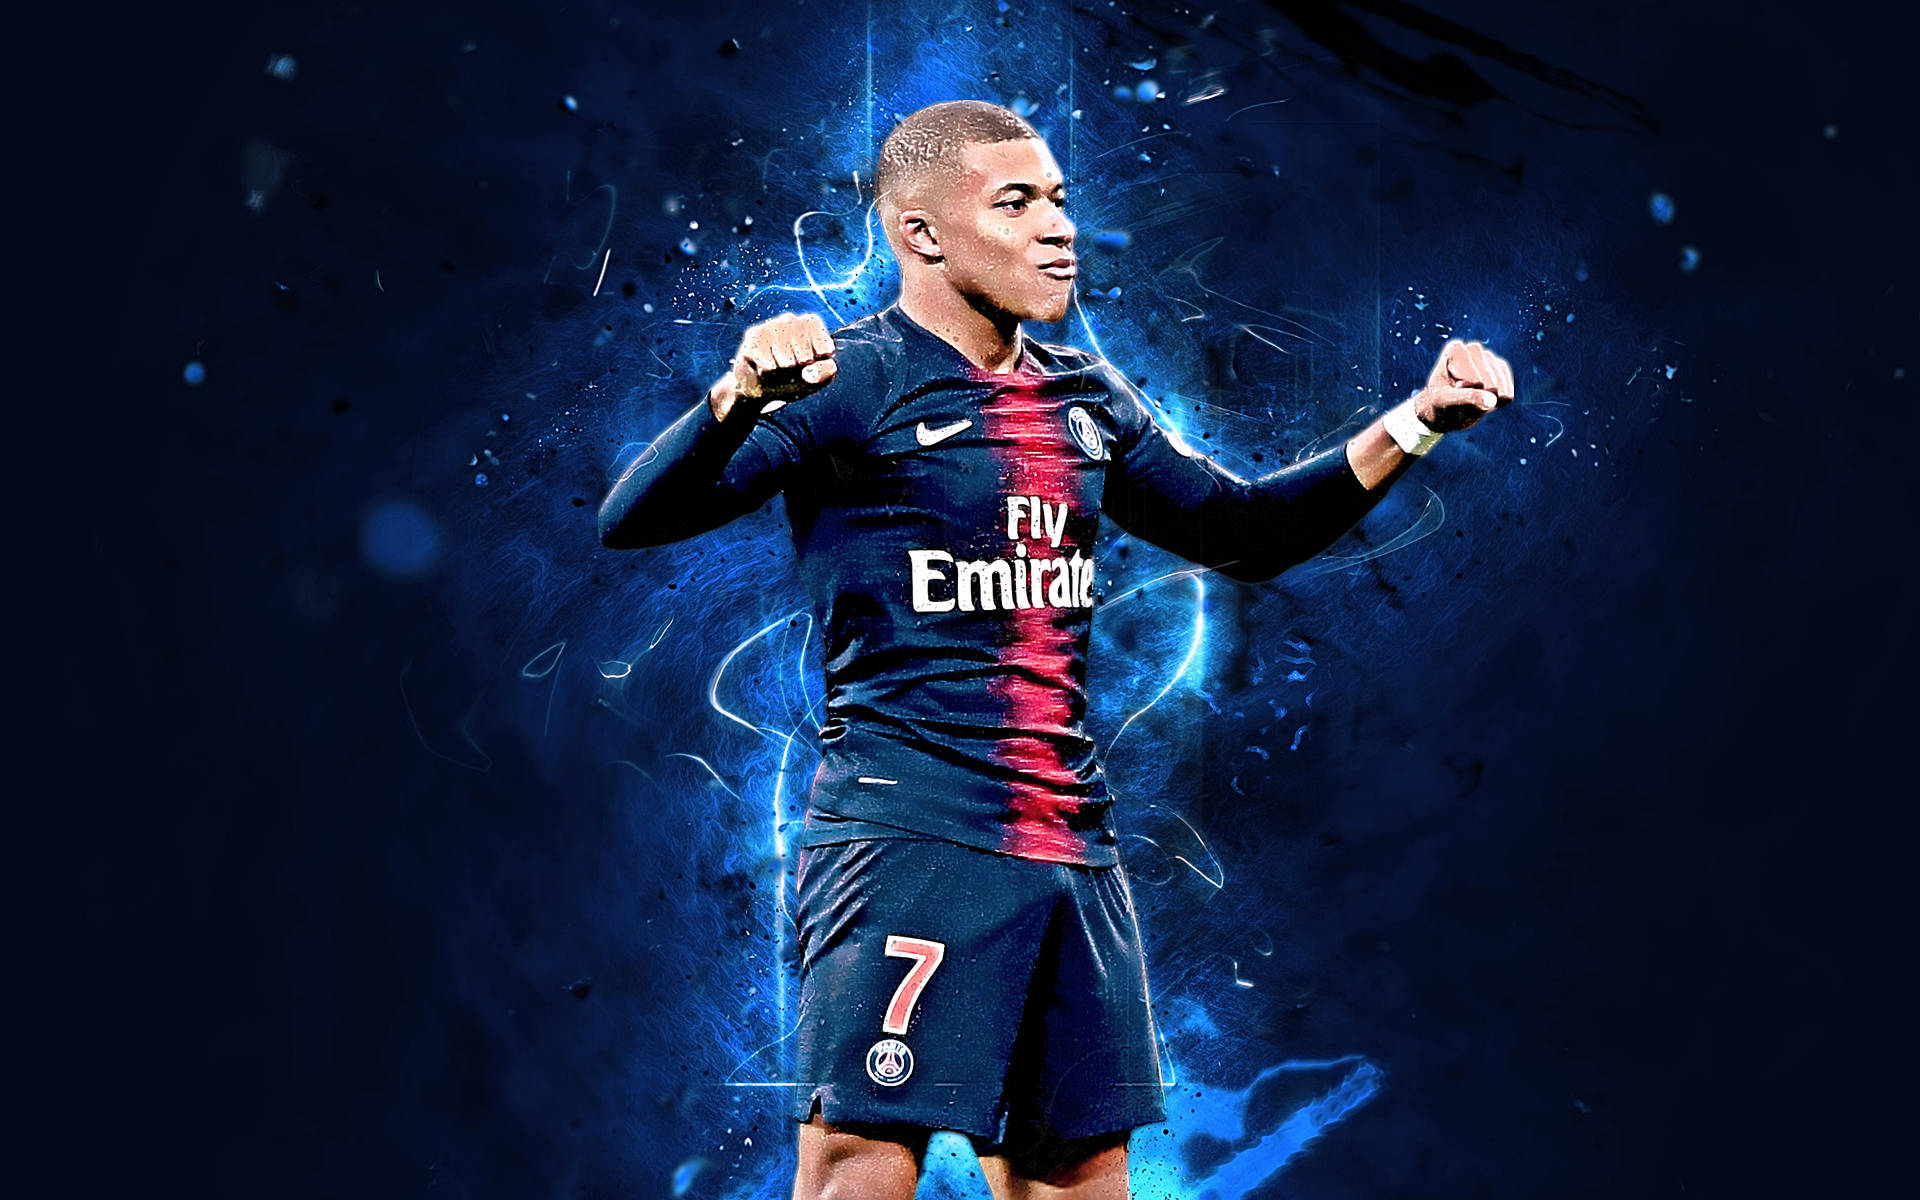 [500+] Soccer Players Wallpapers | Wallpapers.com